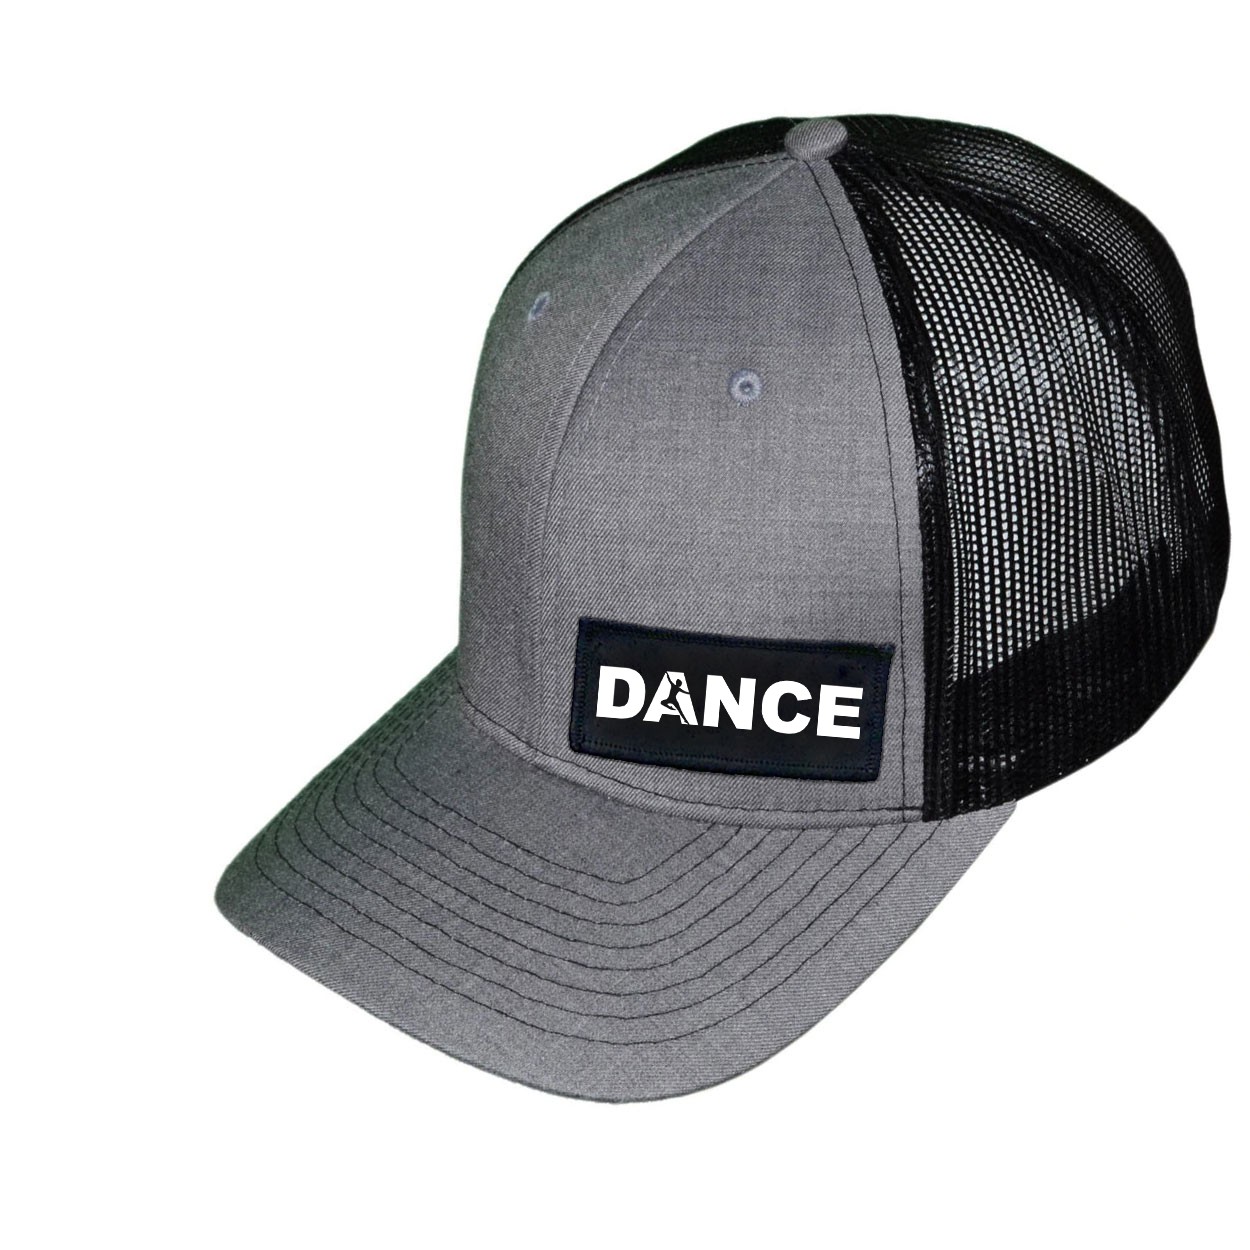 Dance Silhouette Logo Night Out Woven Patch Snapback Trucker Hat Heather Gray/Black (White Logo)